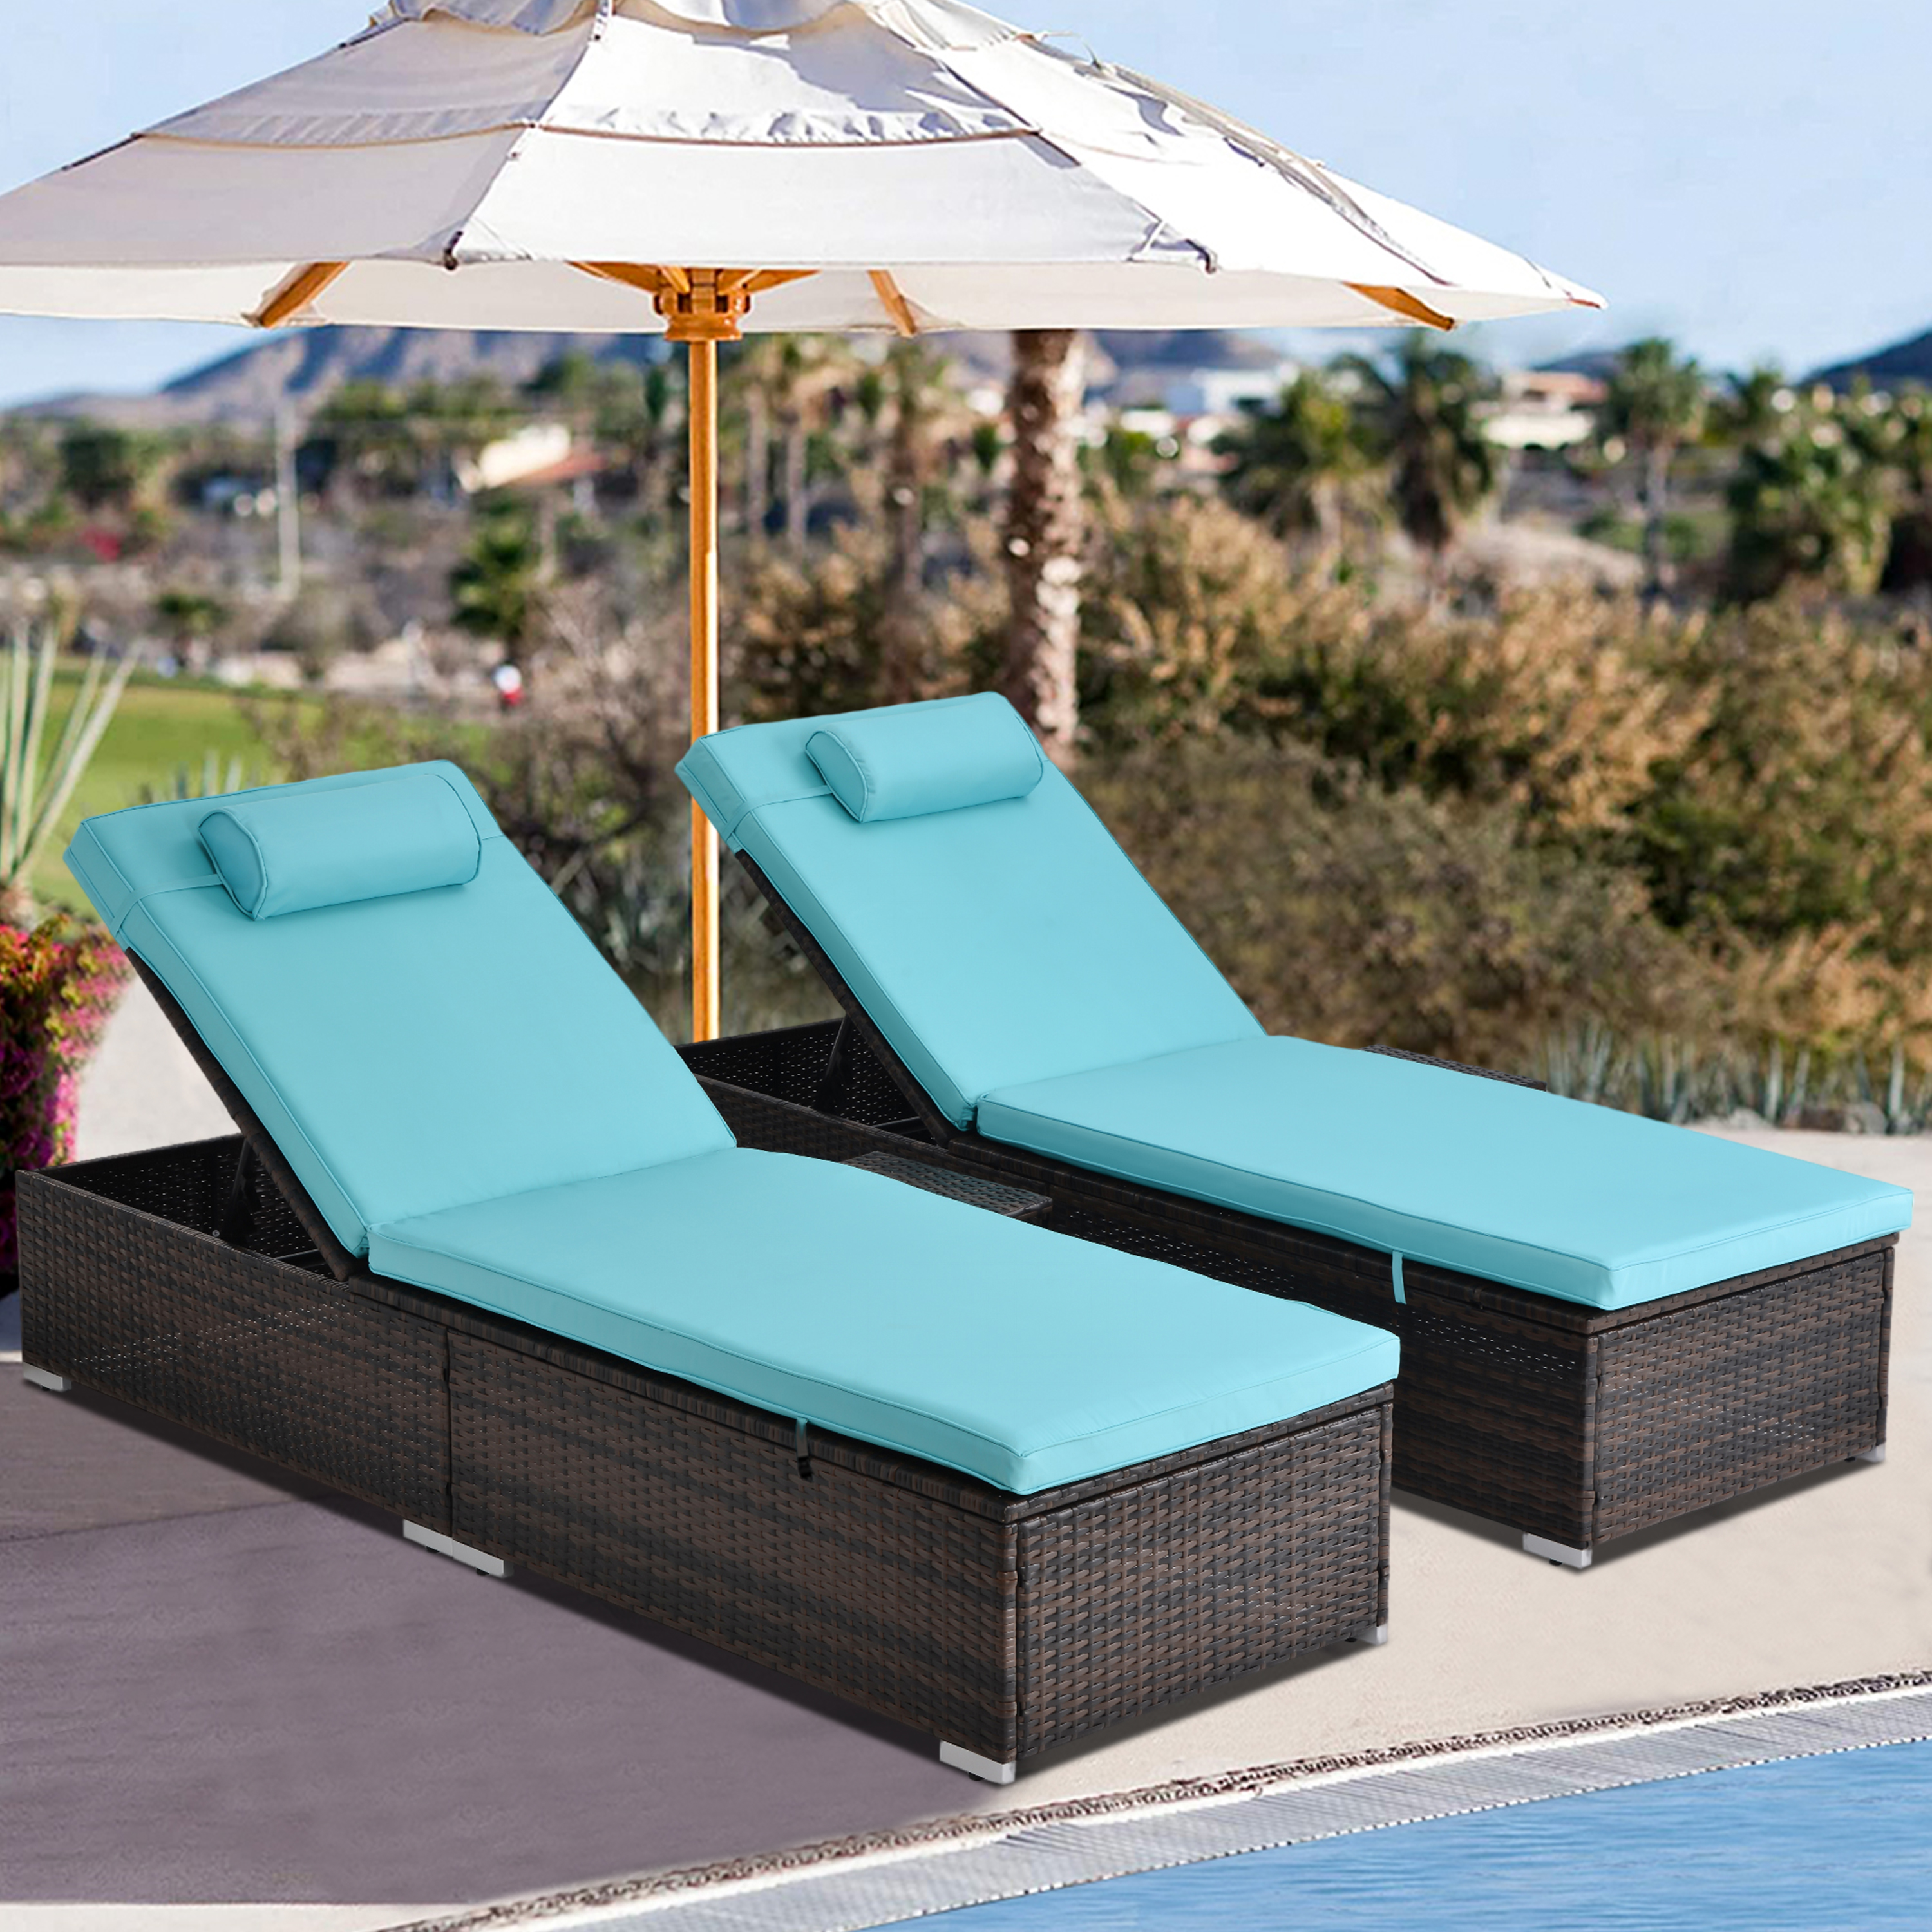 Segmart Patio Lounge Chairs Furniture Set, Adjustable Pool Reclining Chaise Lounge Chairs with Side Table, Folding Outdoor Recliners for Outside, Blue, SS2345 - image 1 of 8